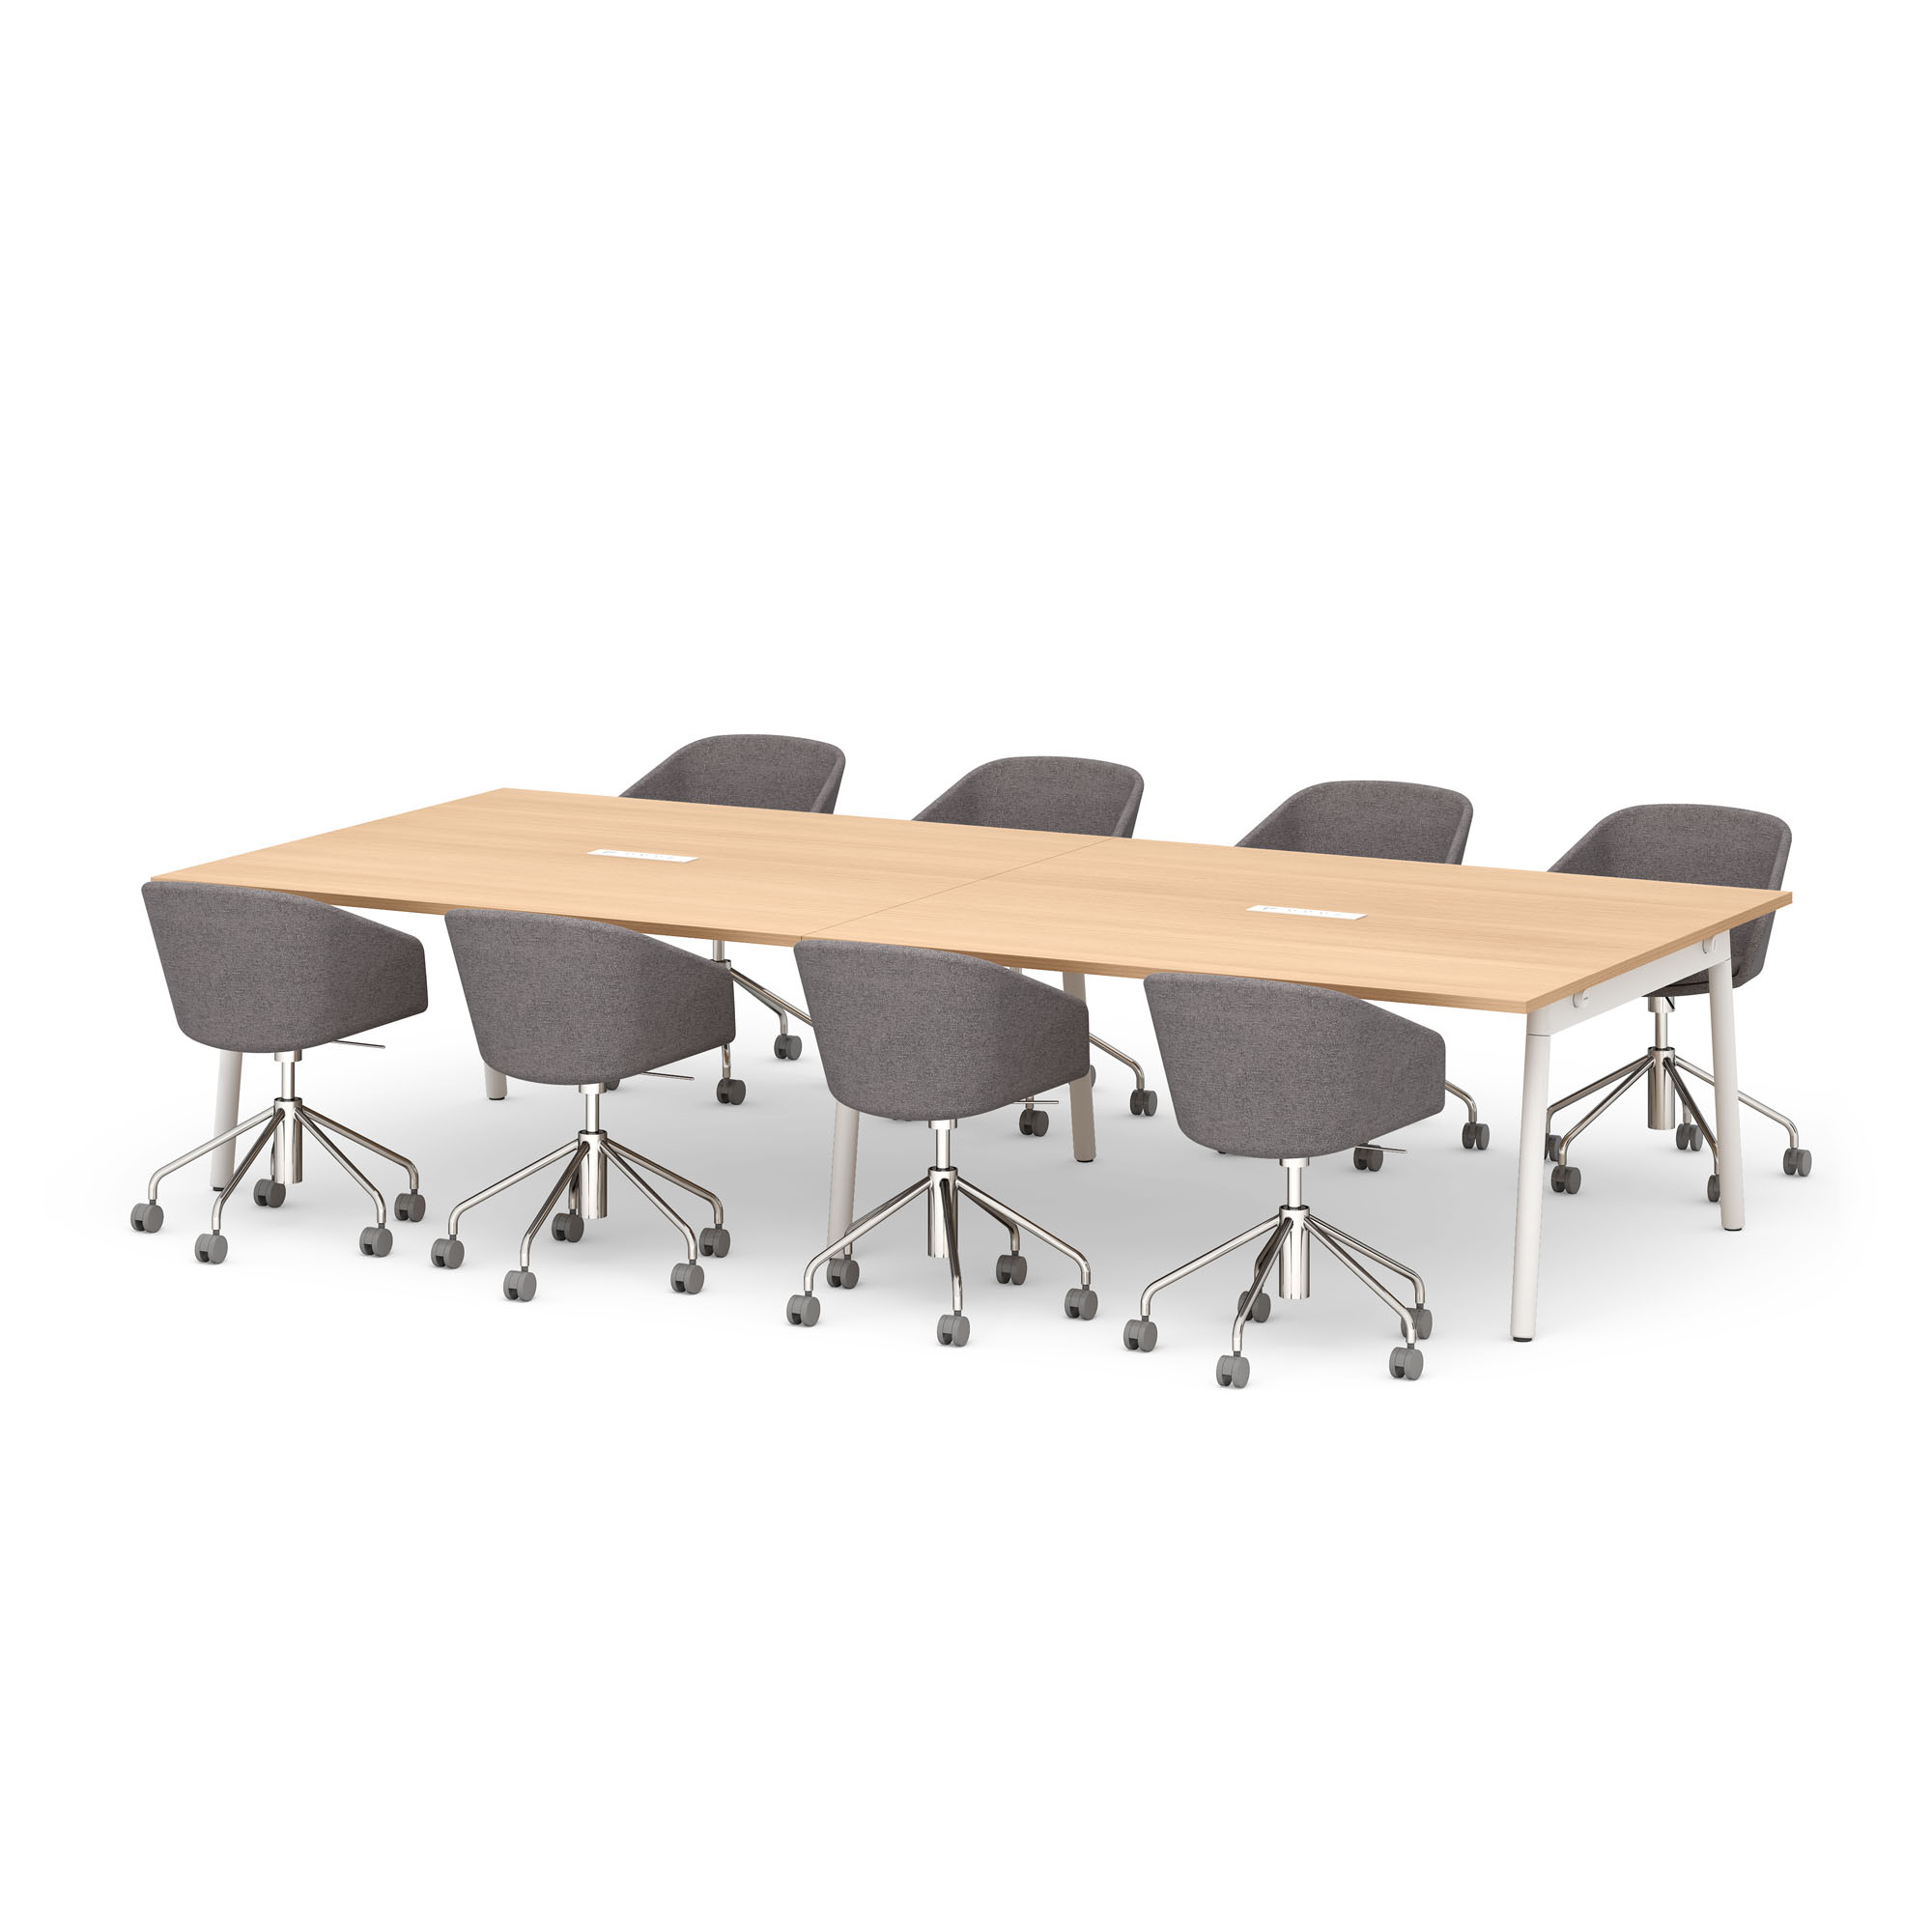 Series A Scale Rectangular Conference Table, Natural Oak 132x60", White Legs,Natural Oak,hi-res